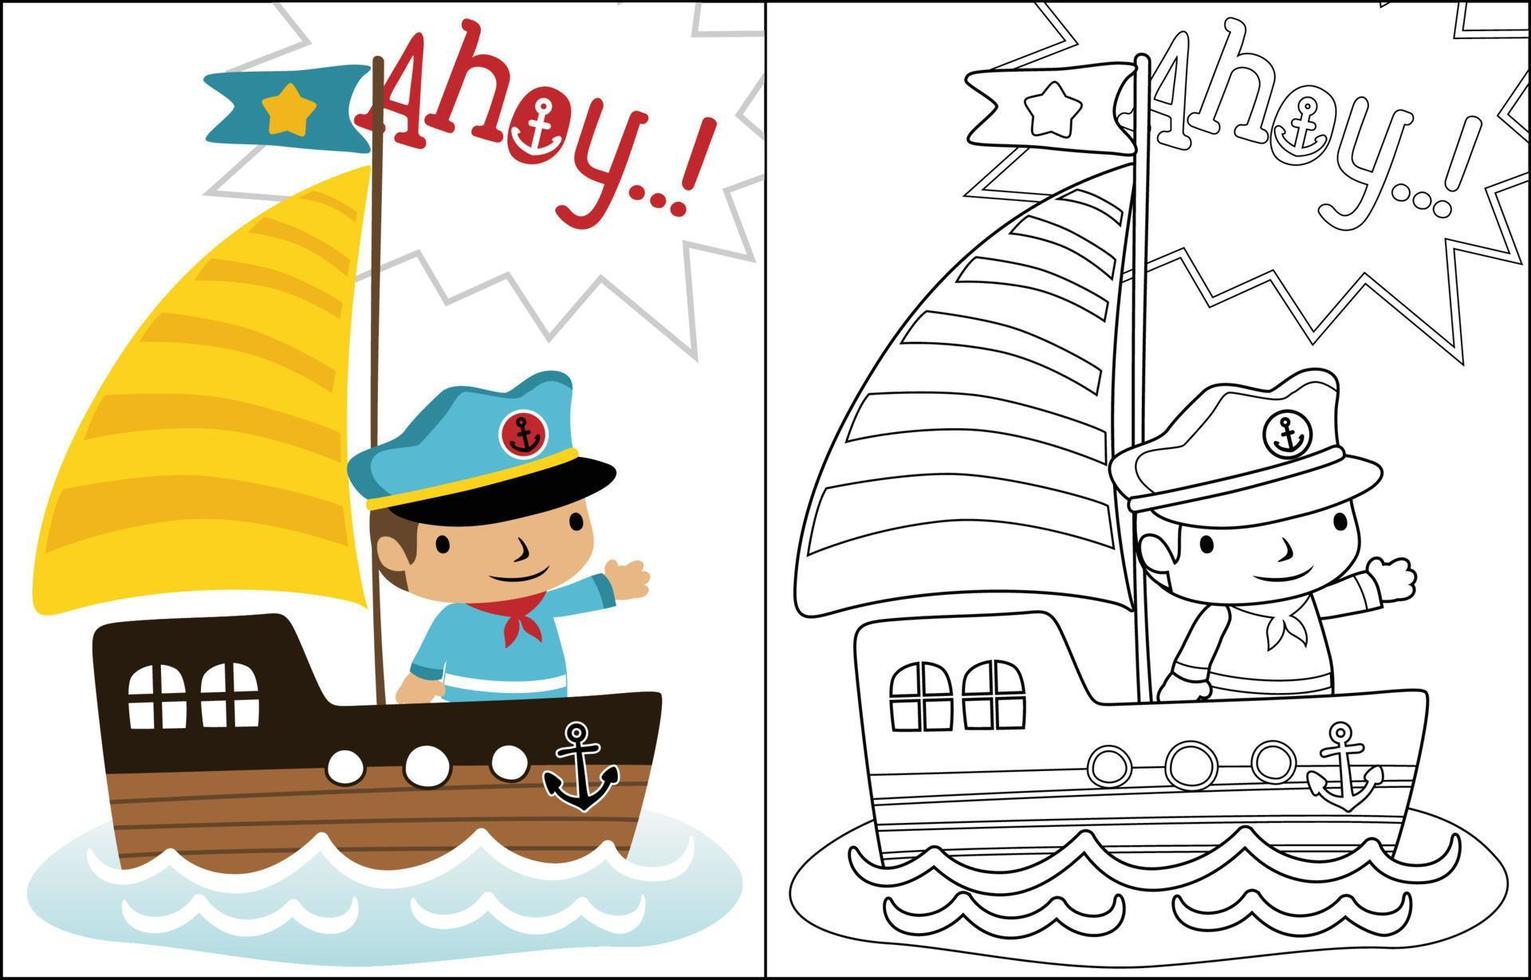 Cartoon vector of little sailor on sailboat, coloring book or page